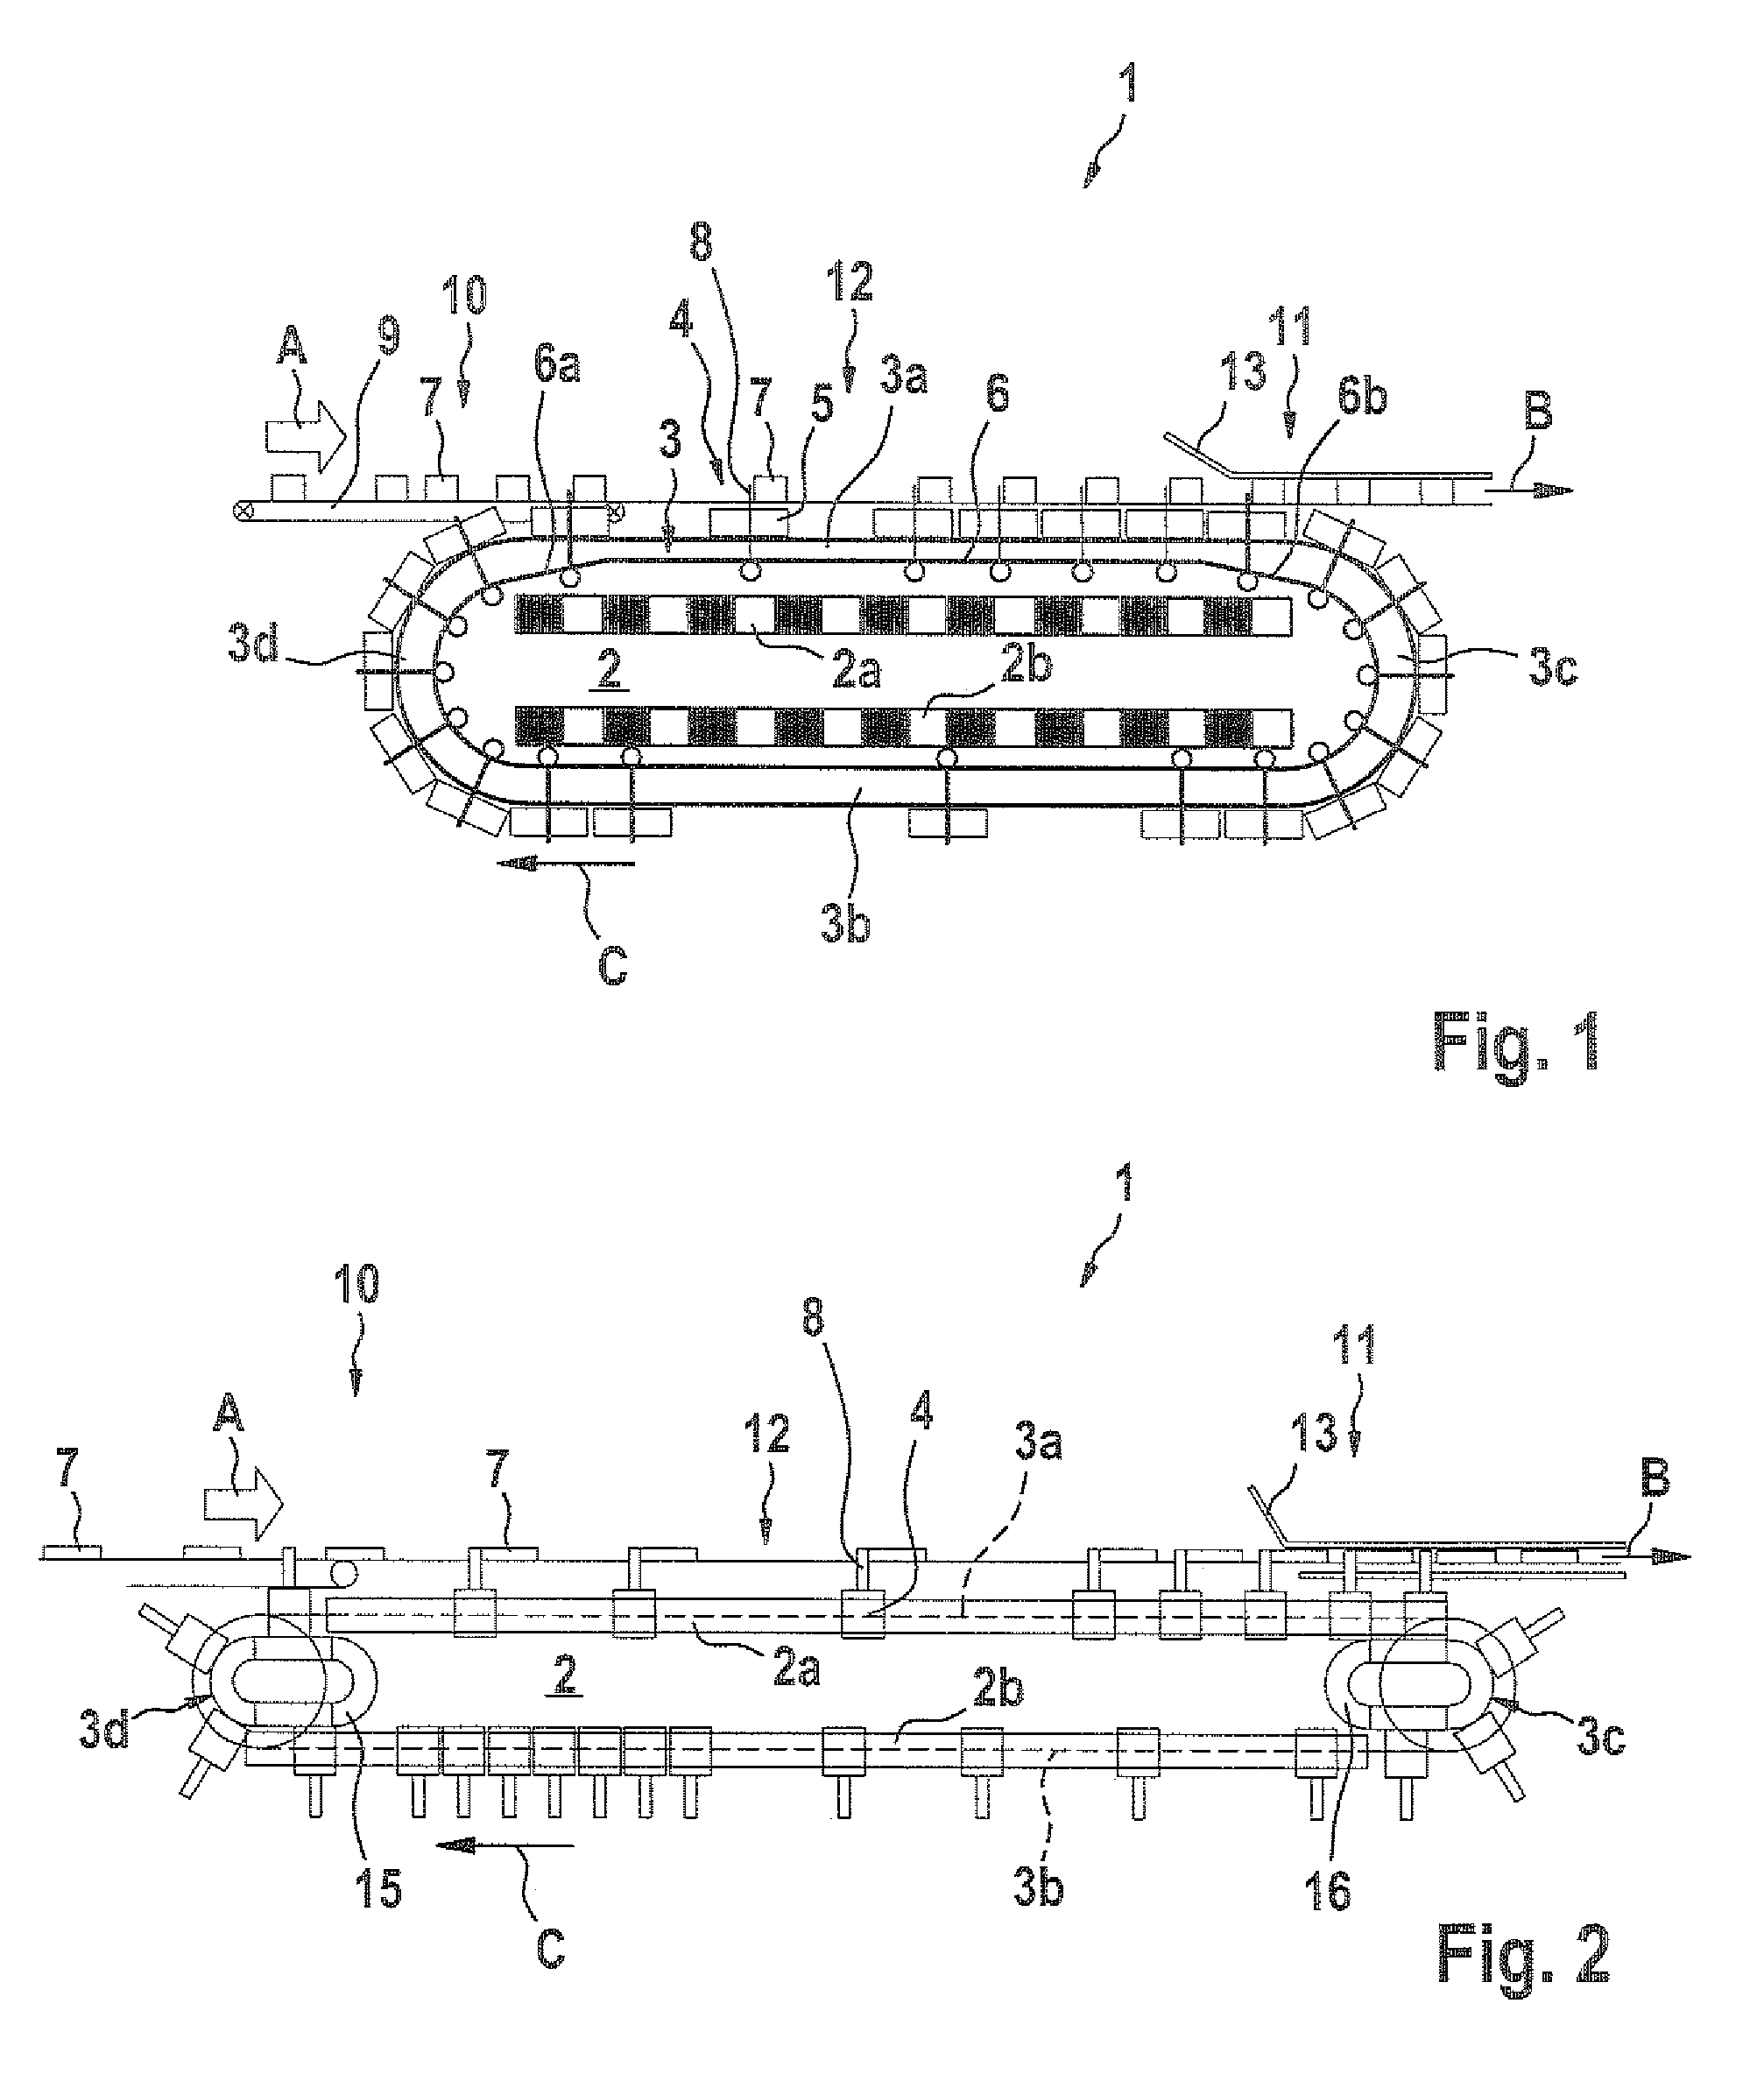 Apparatus and method for transporting products, having a linear drive mechanism